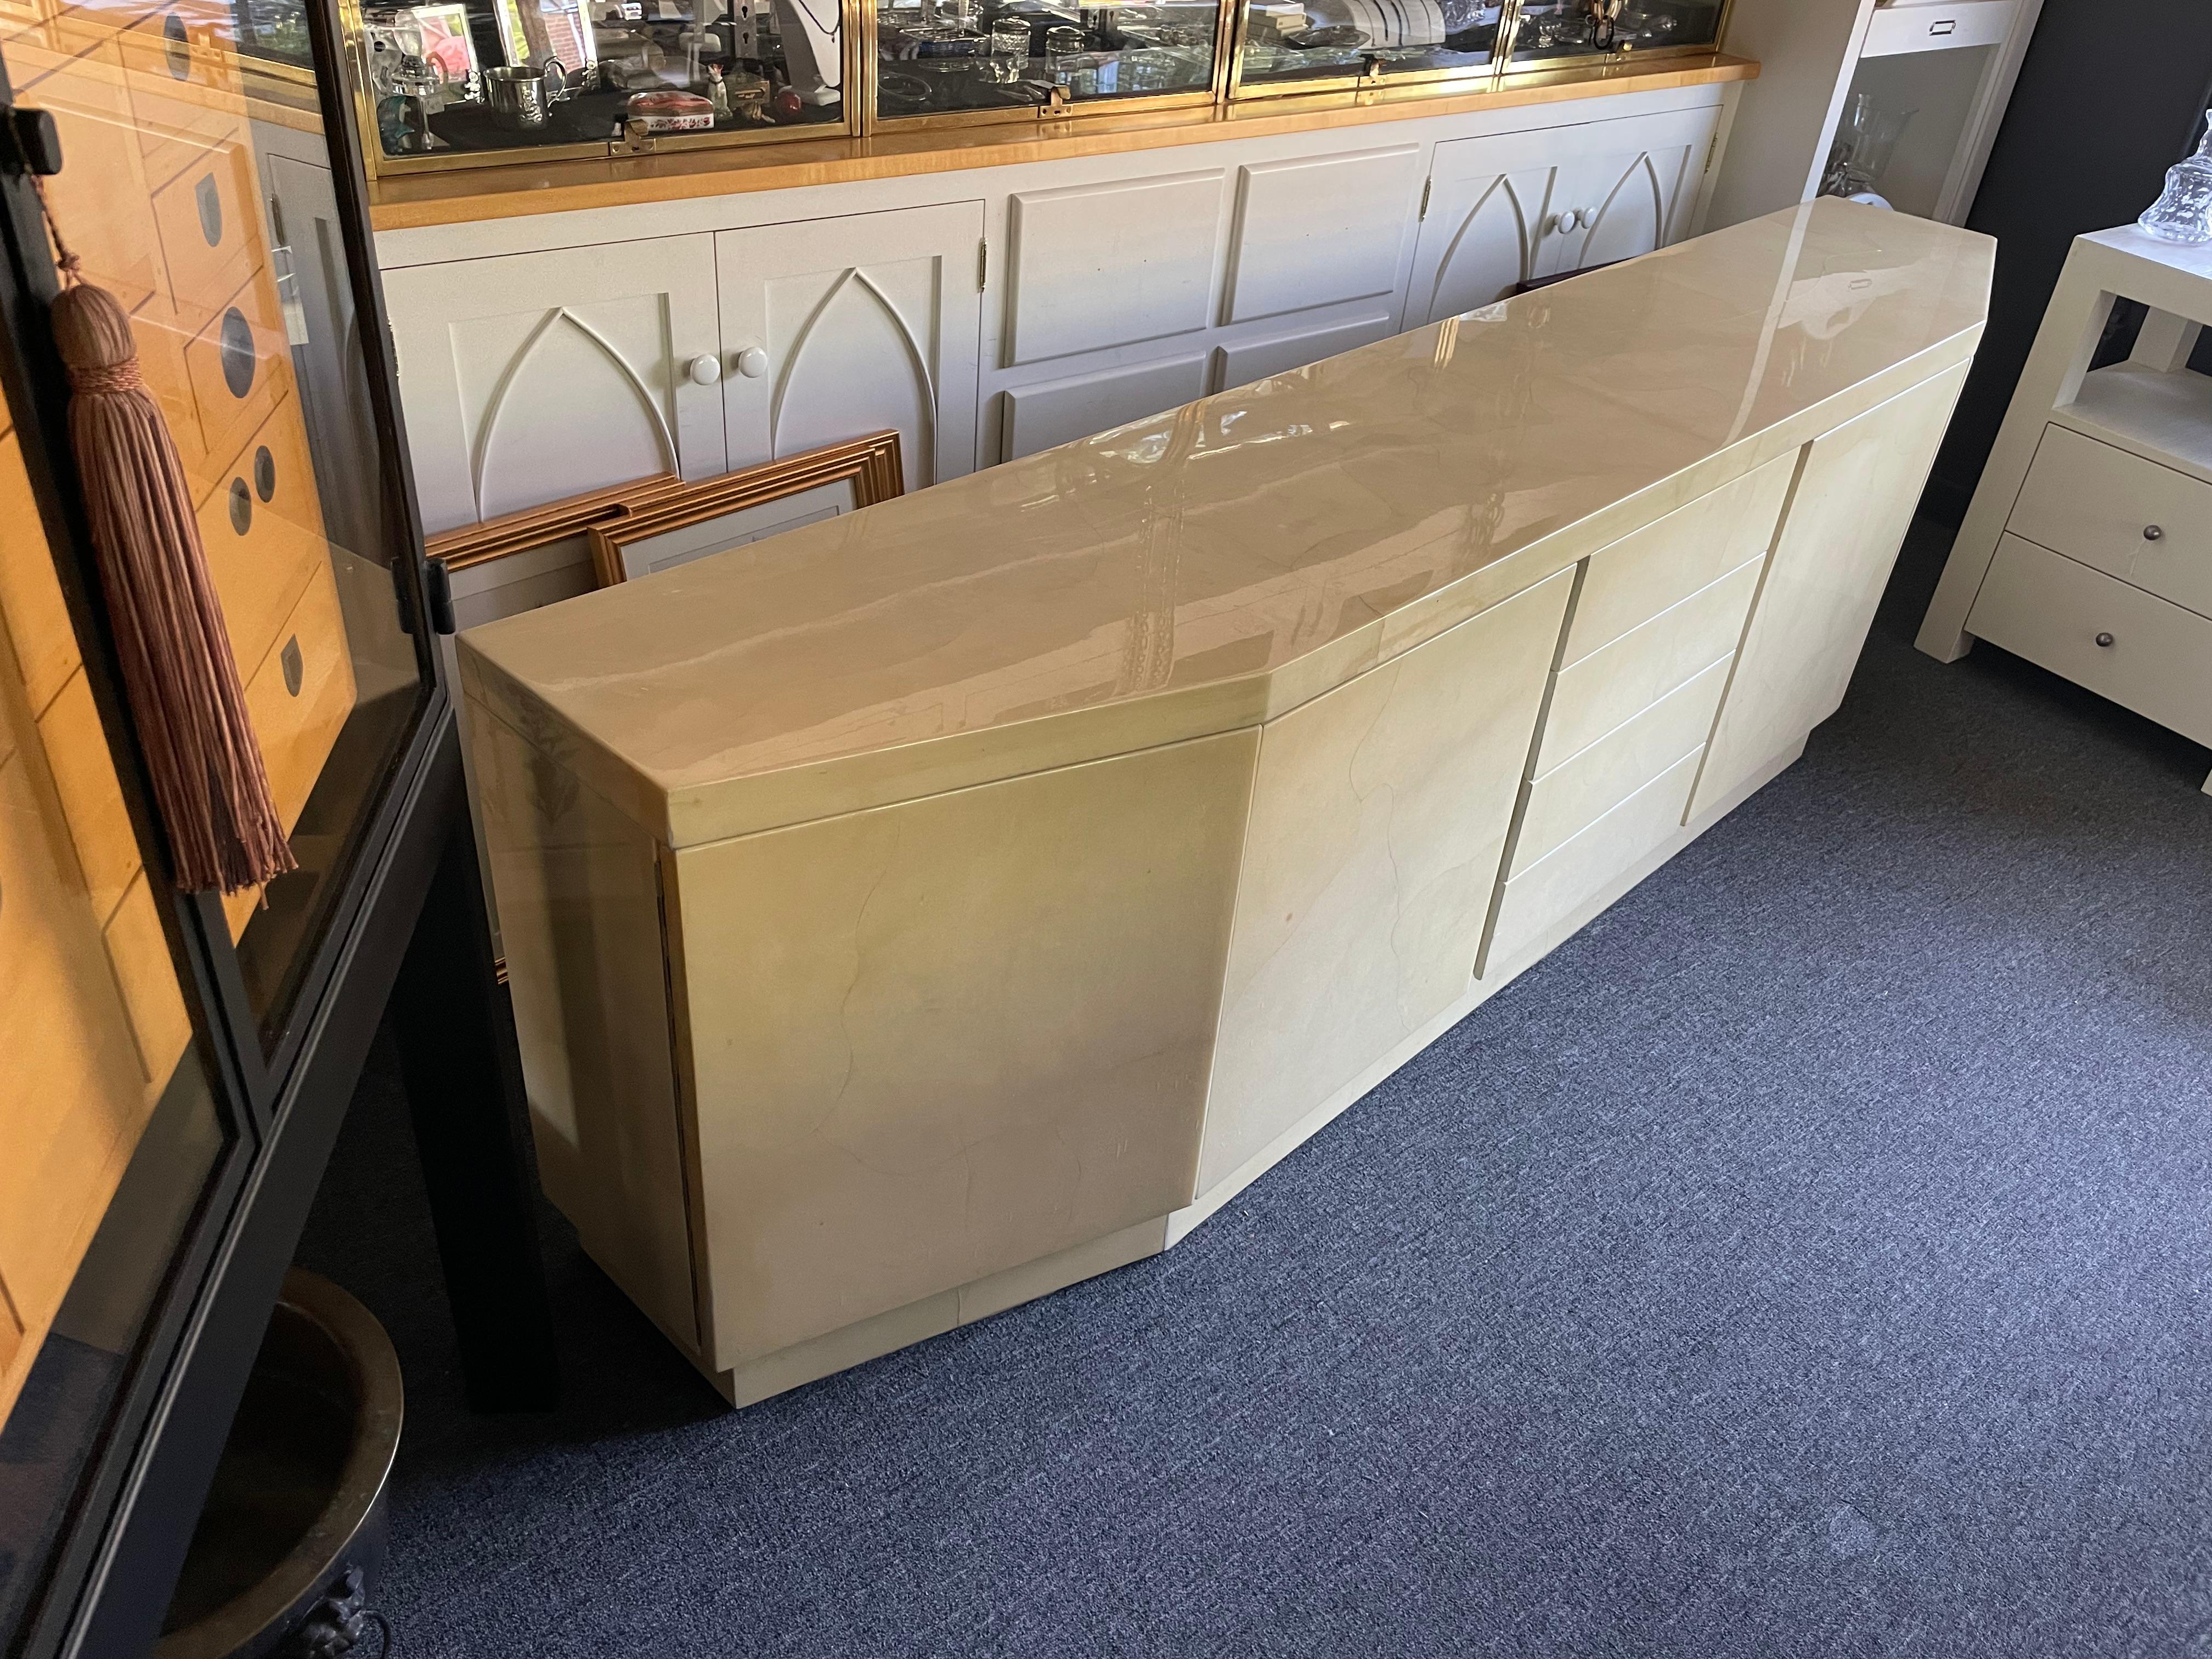 A monumentally large Karl Springer custom angular credenza in a creamy, ultra-luxurious goatskin. The goat skin hides on the front have a wonderfully matched curved detail that makes this piece very stylish. Beautiful used condition.